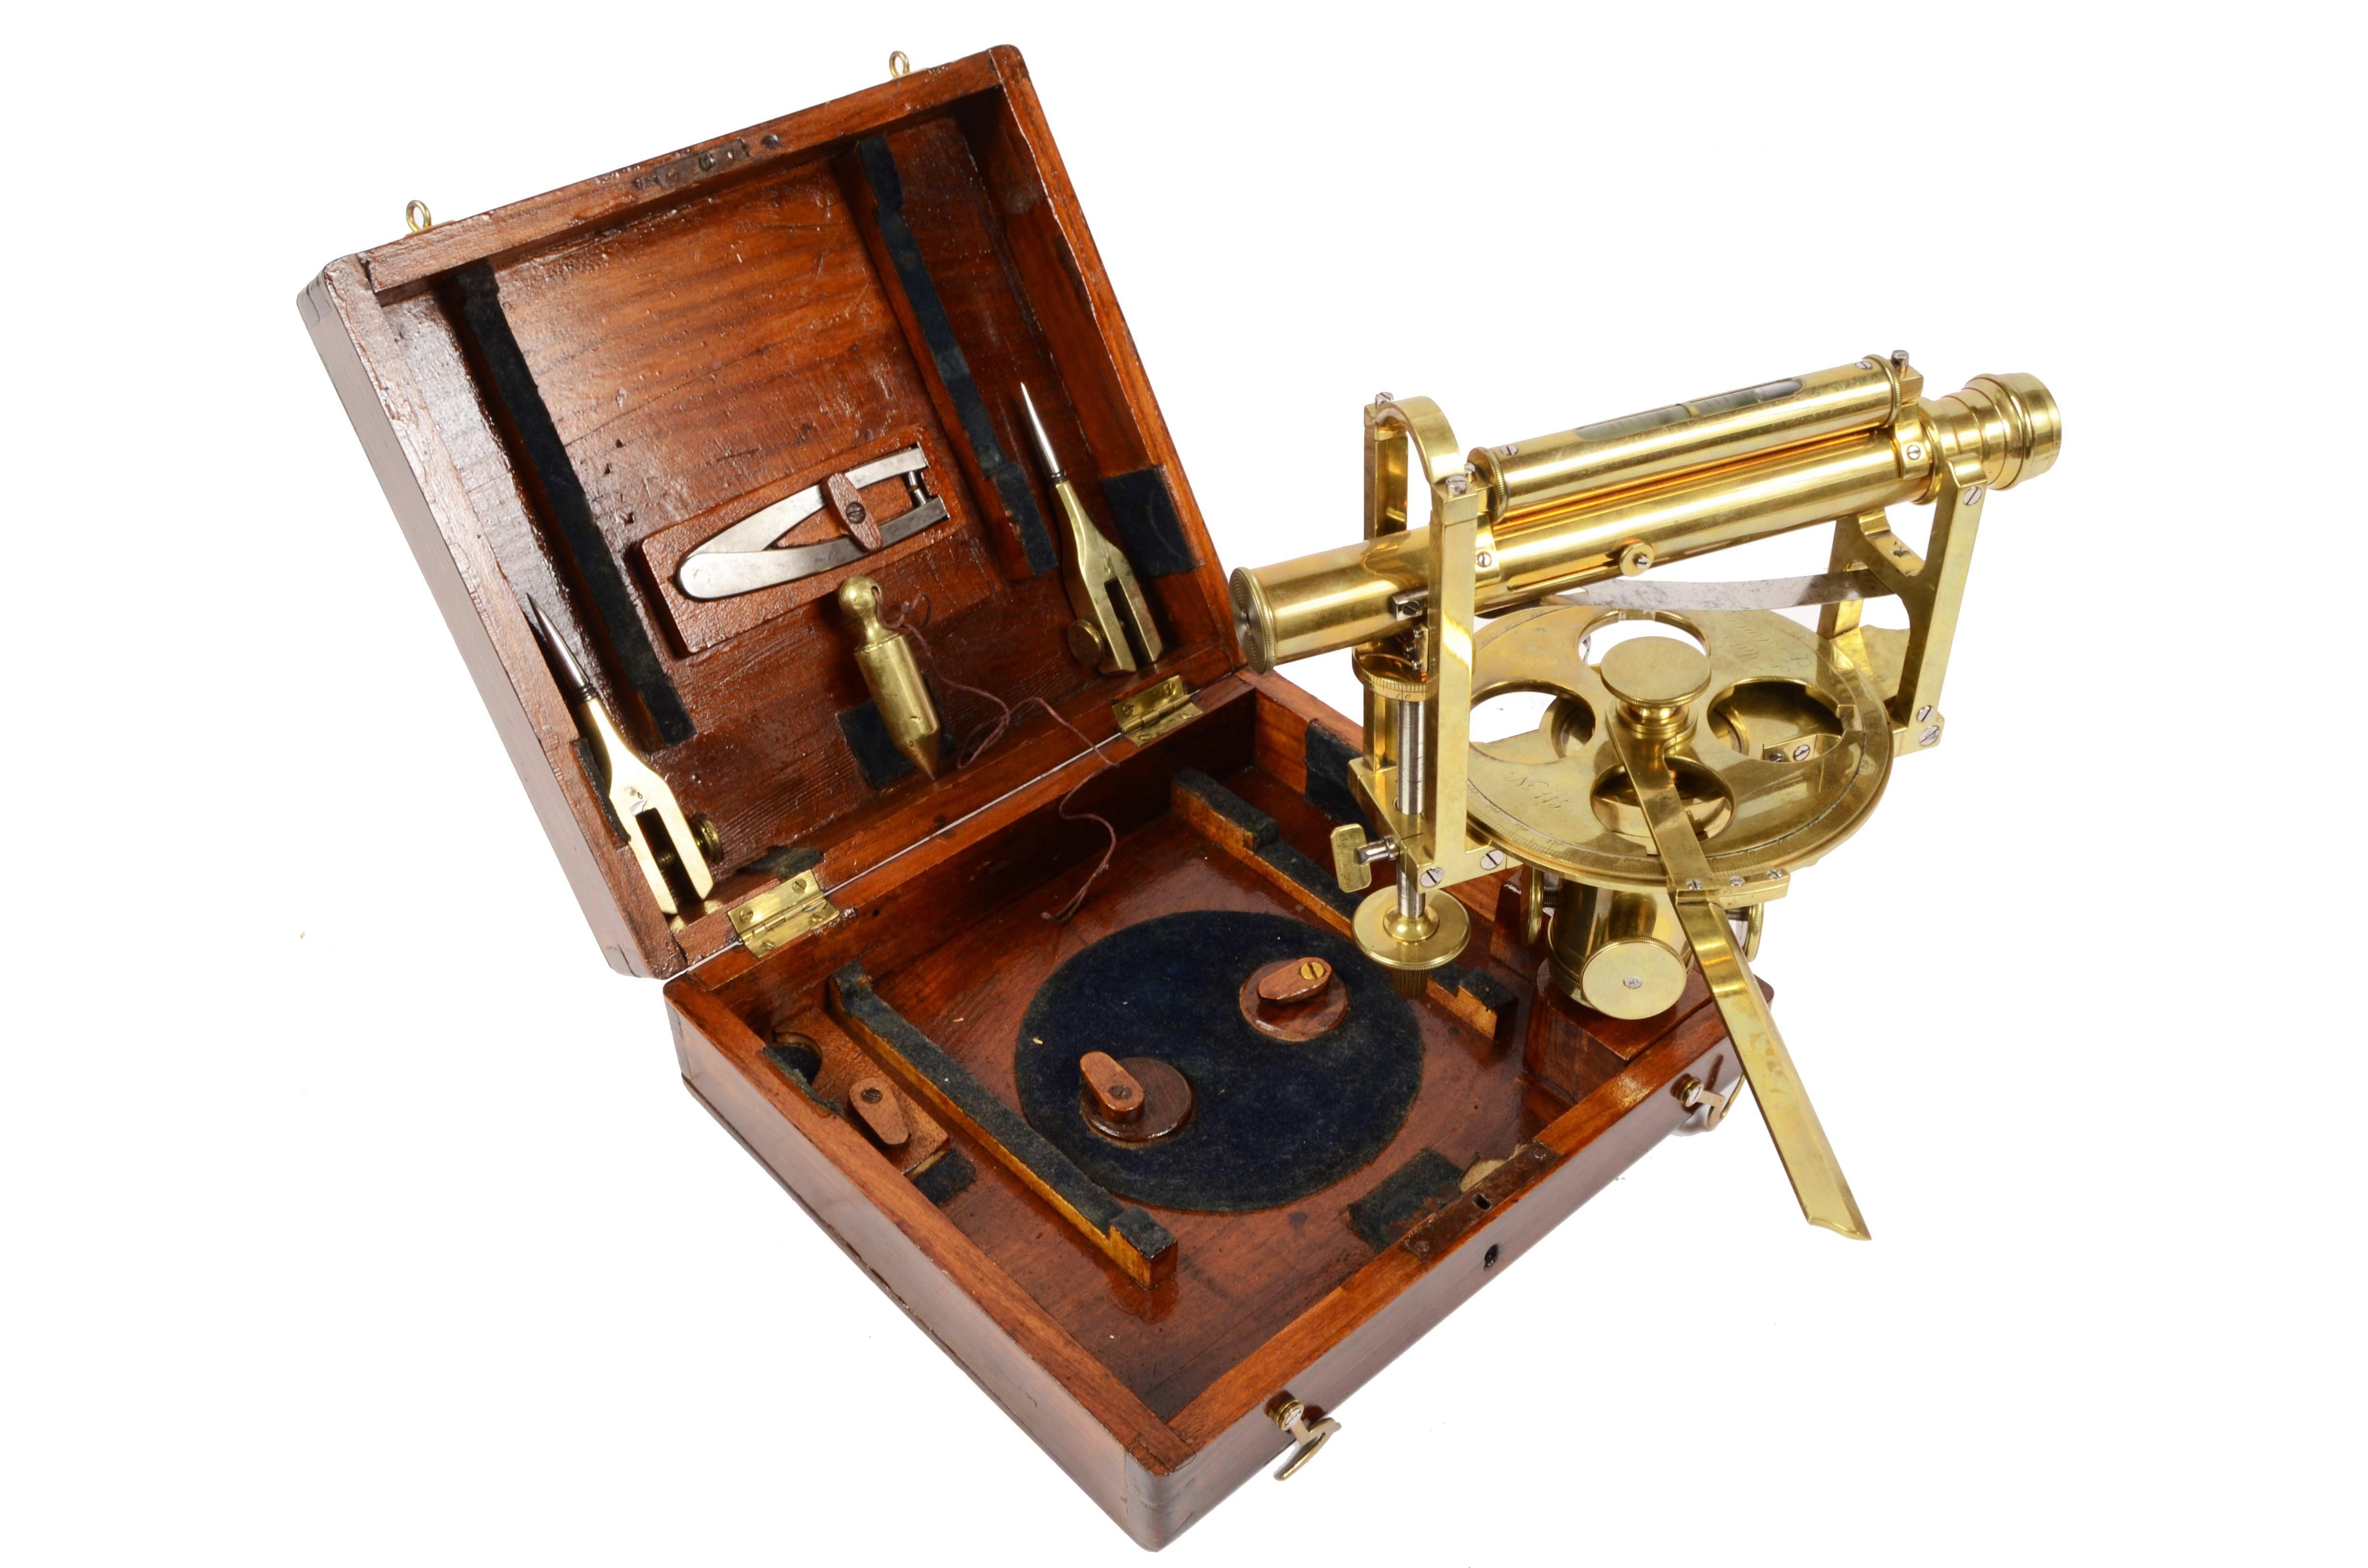 Brass clisigonimeter with horizontal circle signed F. Miller Innsbruck n. 115 second half of the 19th century.
Complete with accessories and original wooden box. 
Box size 21 x 19 x 7 cm - 8.2 x 7.5 x 2.8 inches. 
Excellent condition, fully